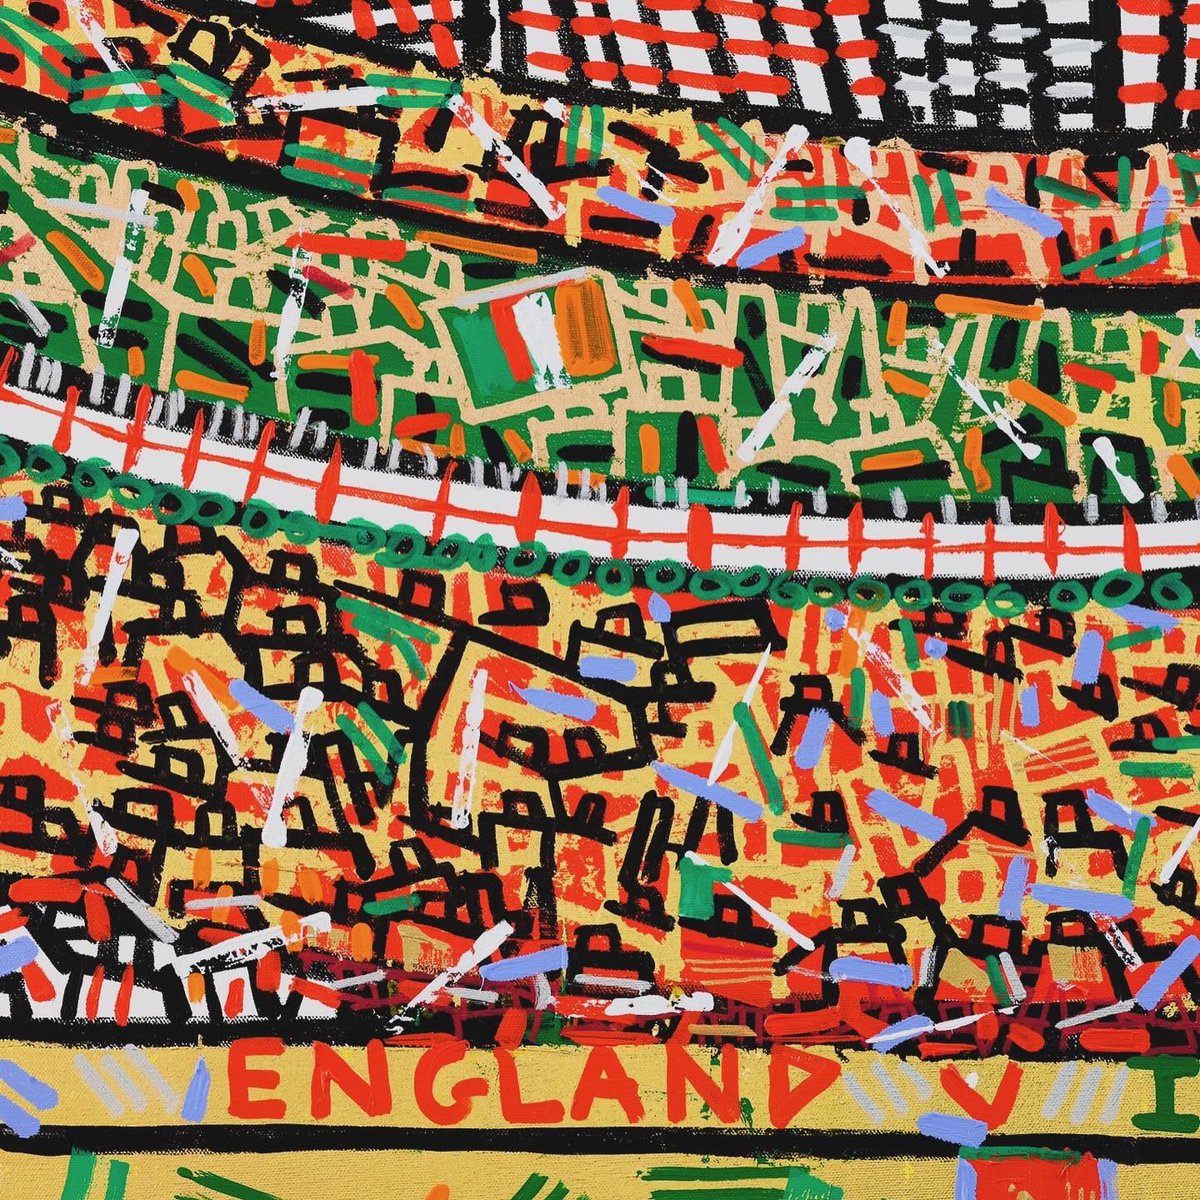 England V Ireland at twickenham, 100x100cm, acrylic and 24k gold on canvas. Loved creating this live during the 6 nations. Contains lots of real 24k gold and shows the two nations before the game. @EnglandRugby . #englandrugby #sportart #rugbyart #artgalleries #artbuyers